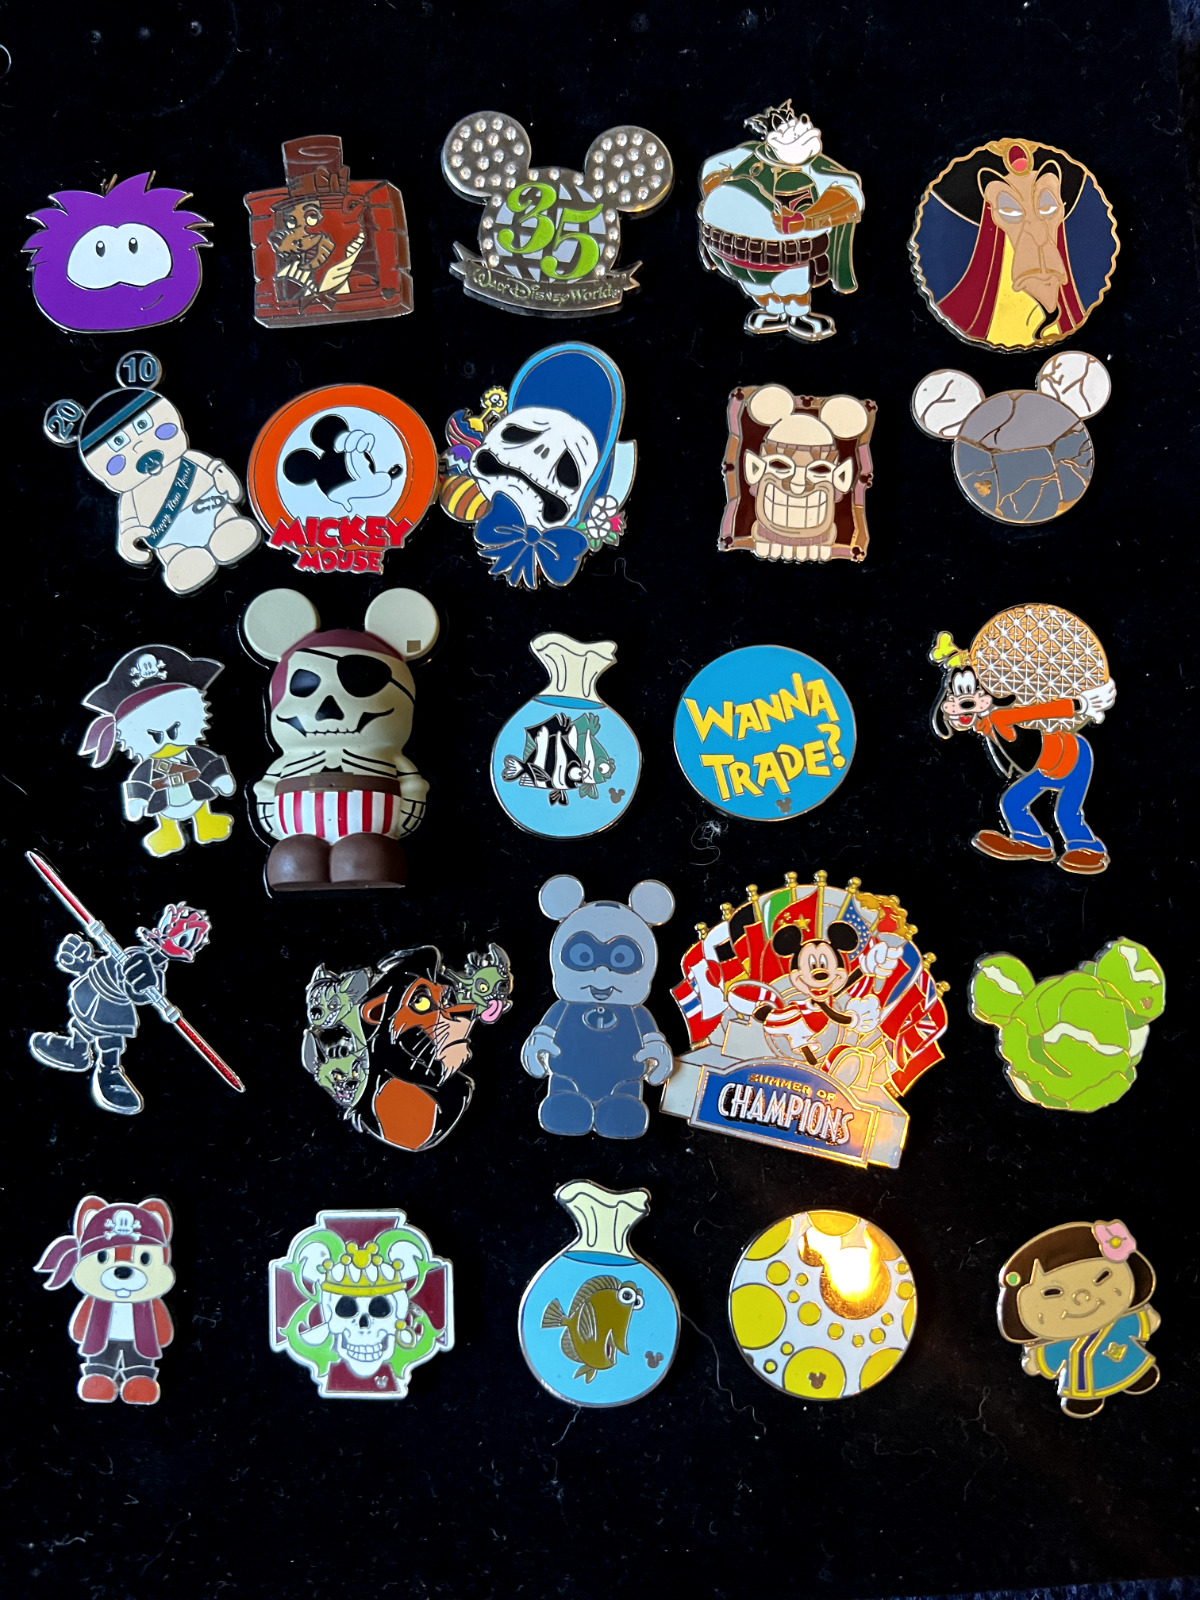 25 Assorted Disney Pins - For Trading/Collecting/Display - No Duplicates